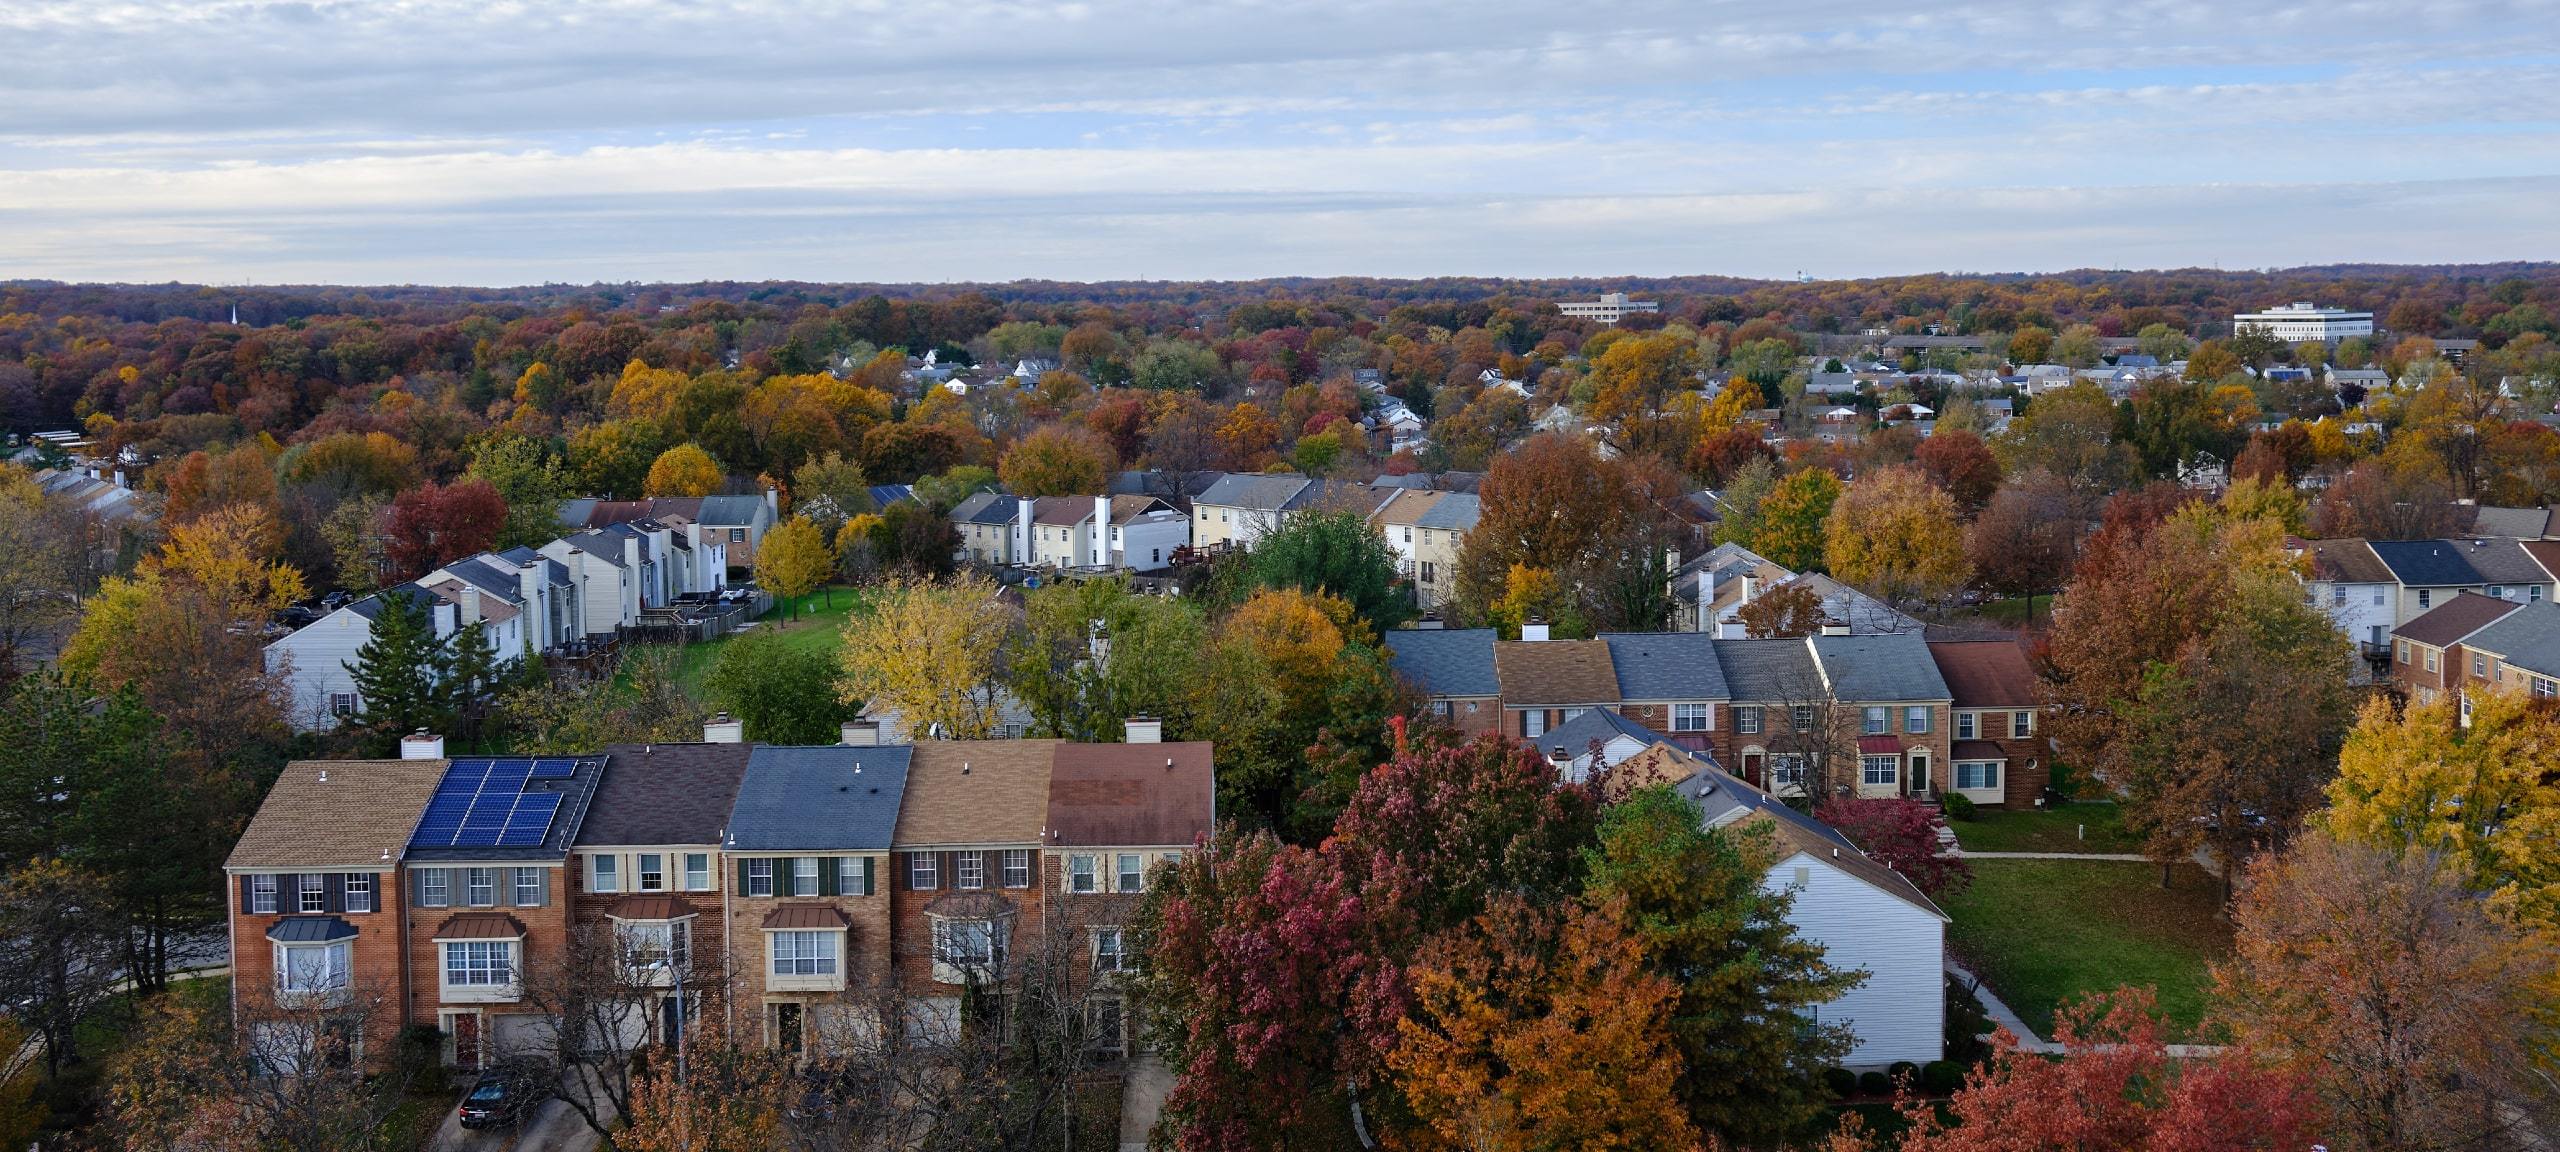 Aerial view of Laurel, Maryland homes during autumn